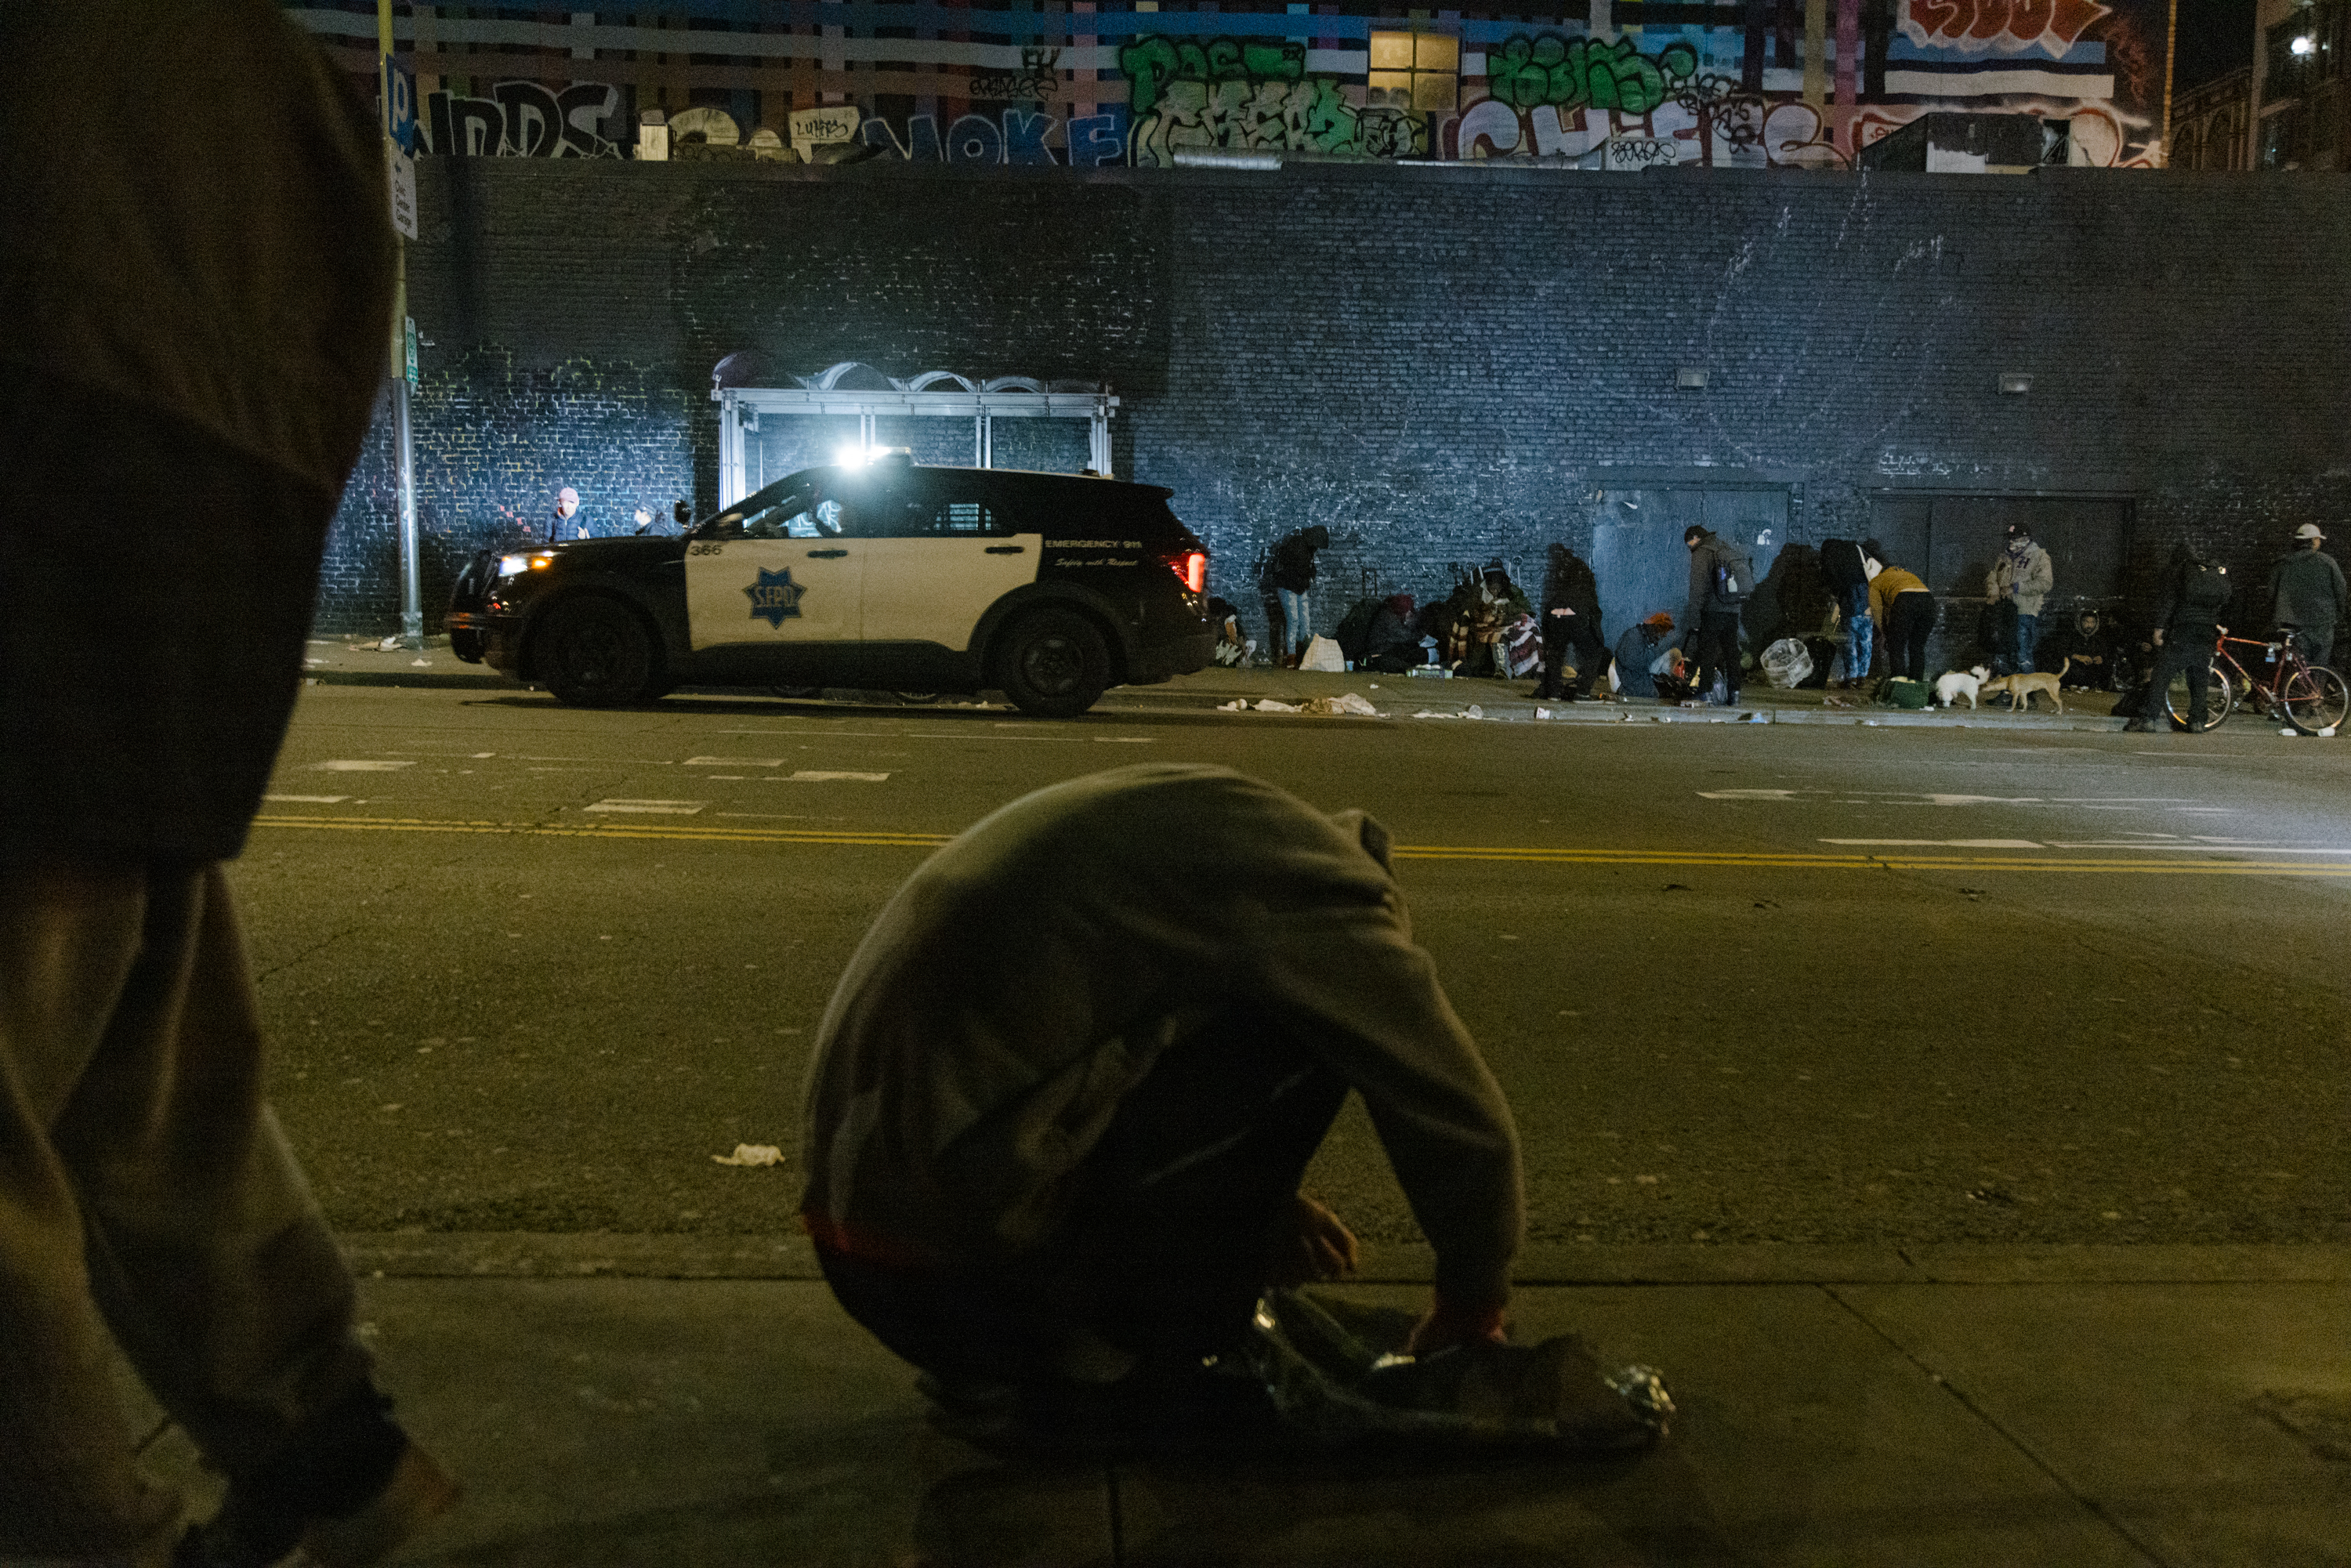 A person crouches on the side of the street as a police car drives by a group of people standing on the sidewalk.